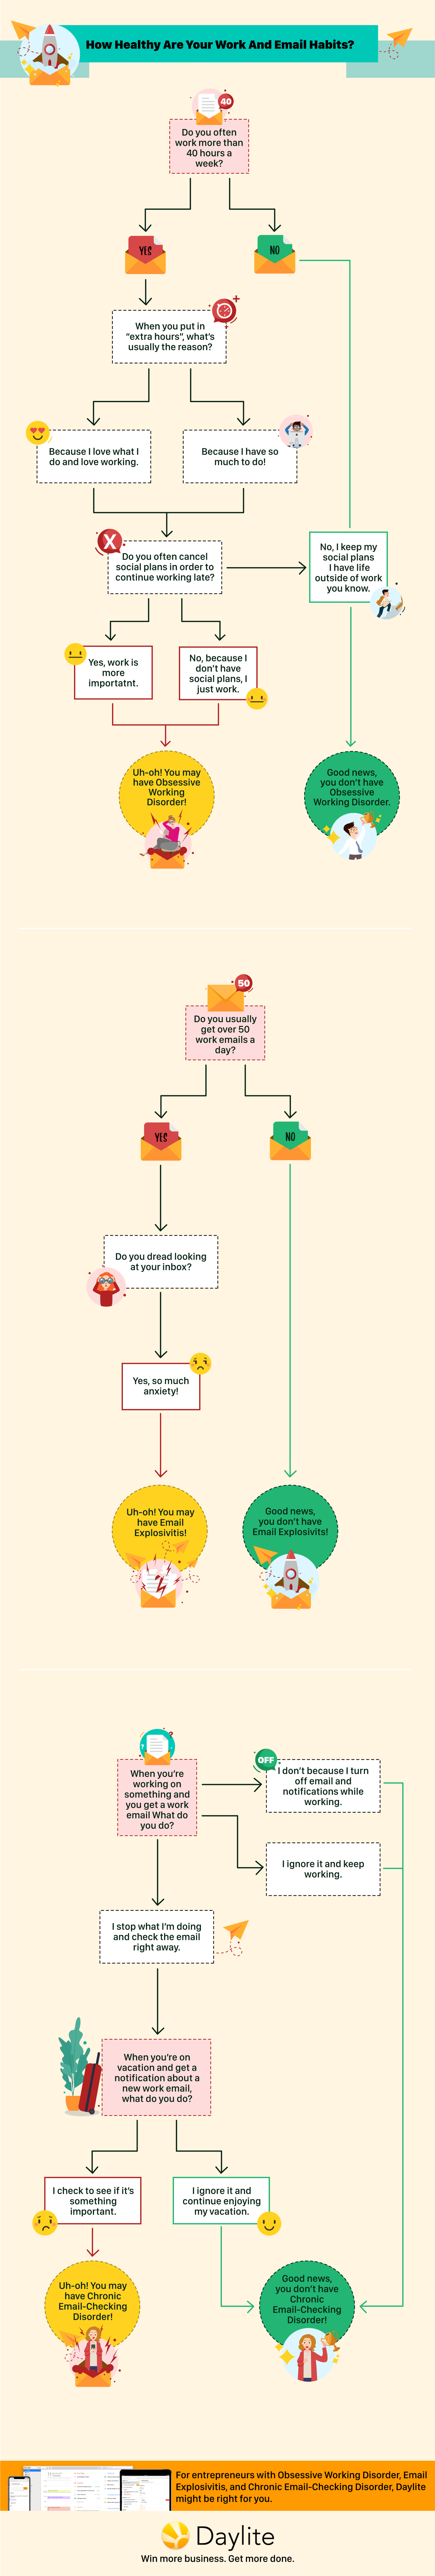 Flowchart to see how healthy your work and email habits are